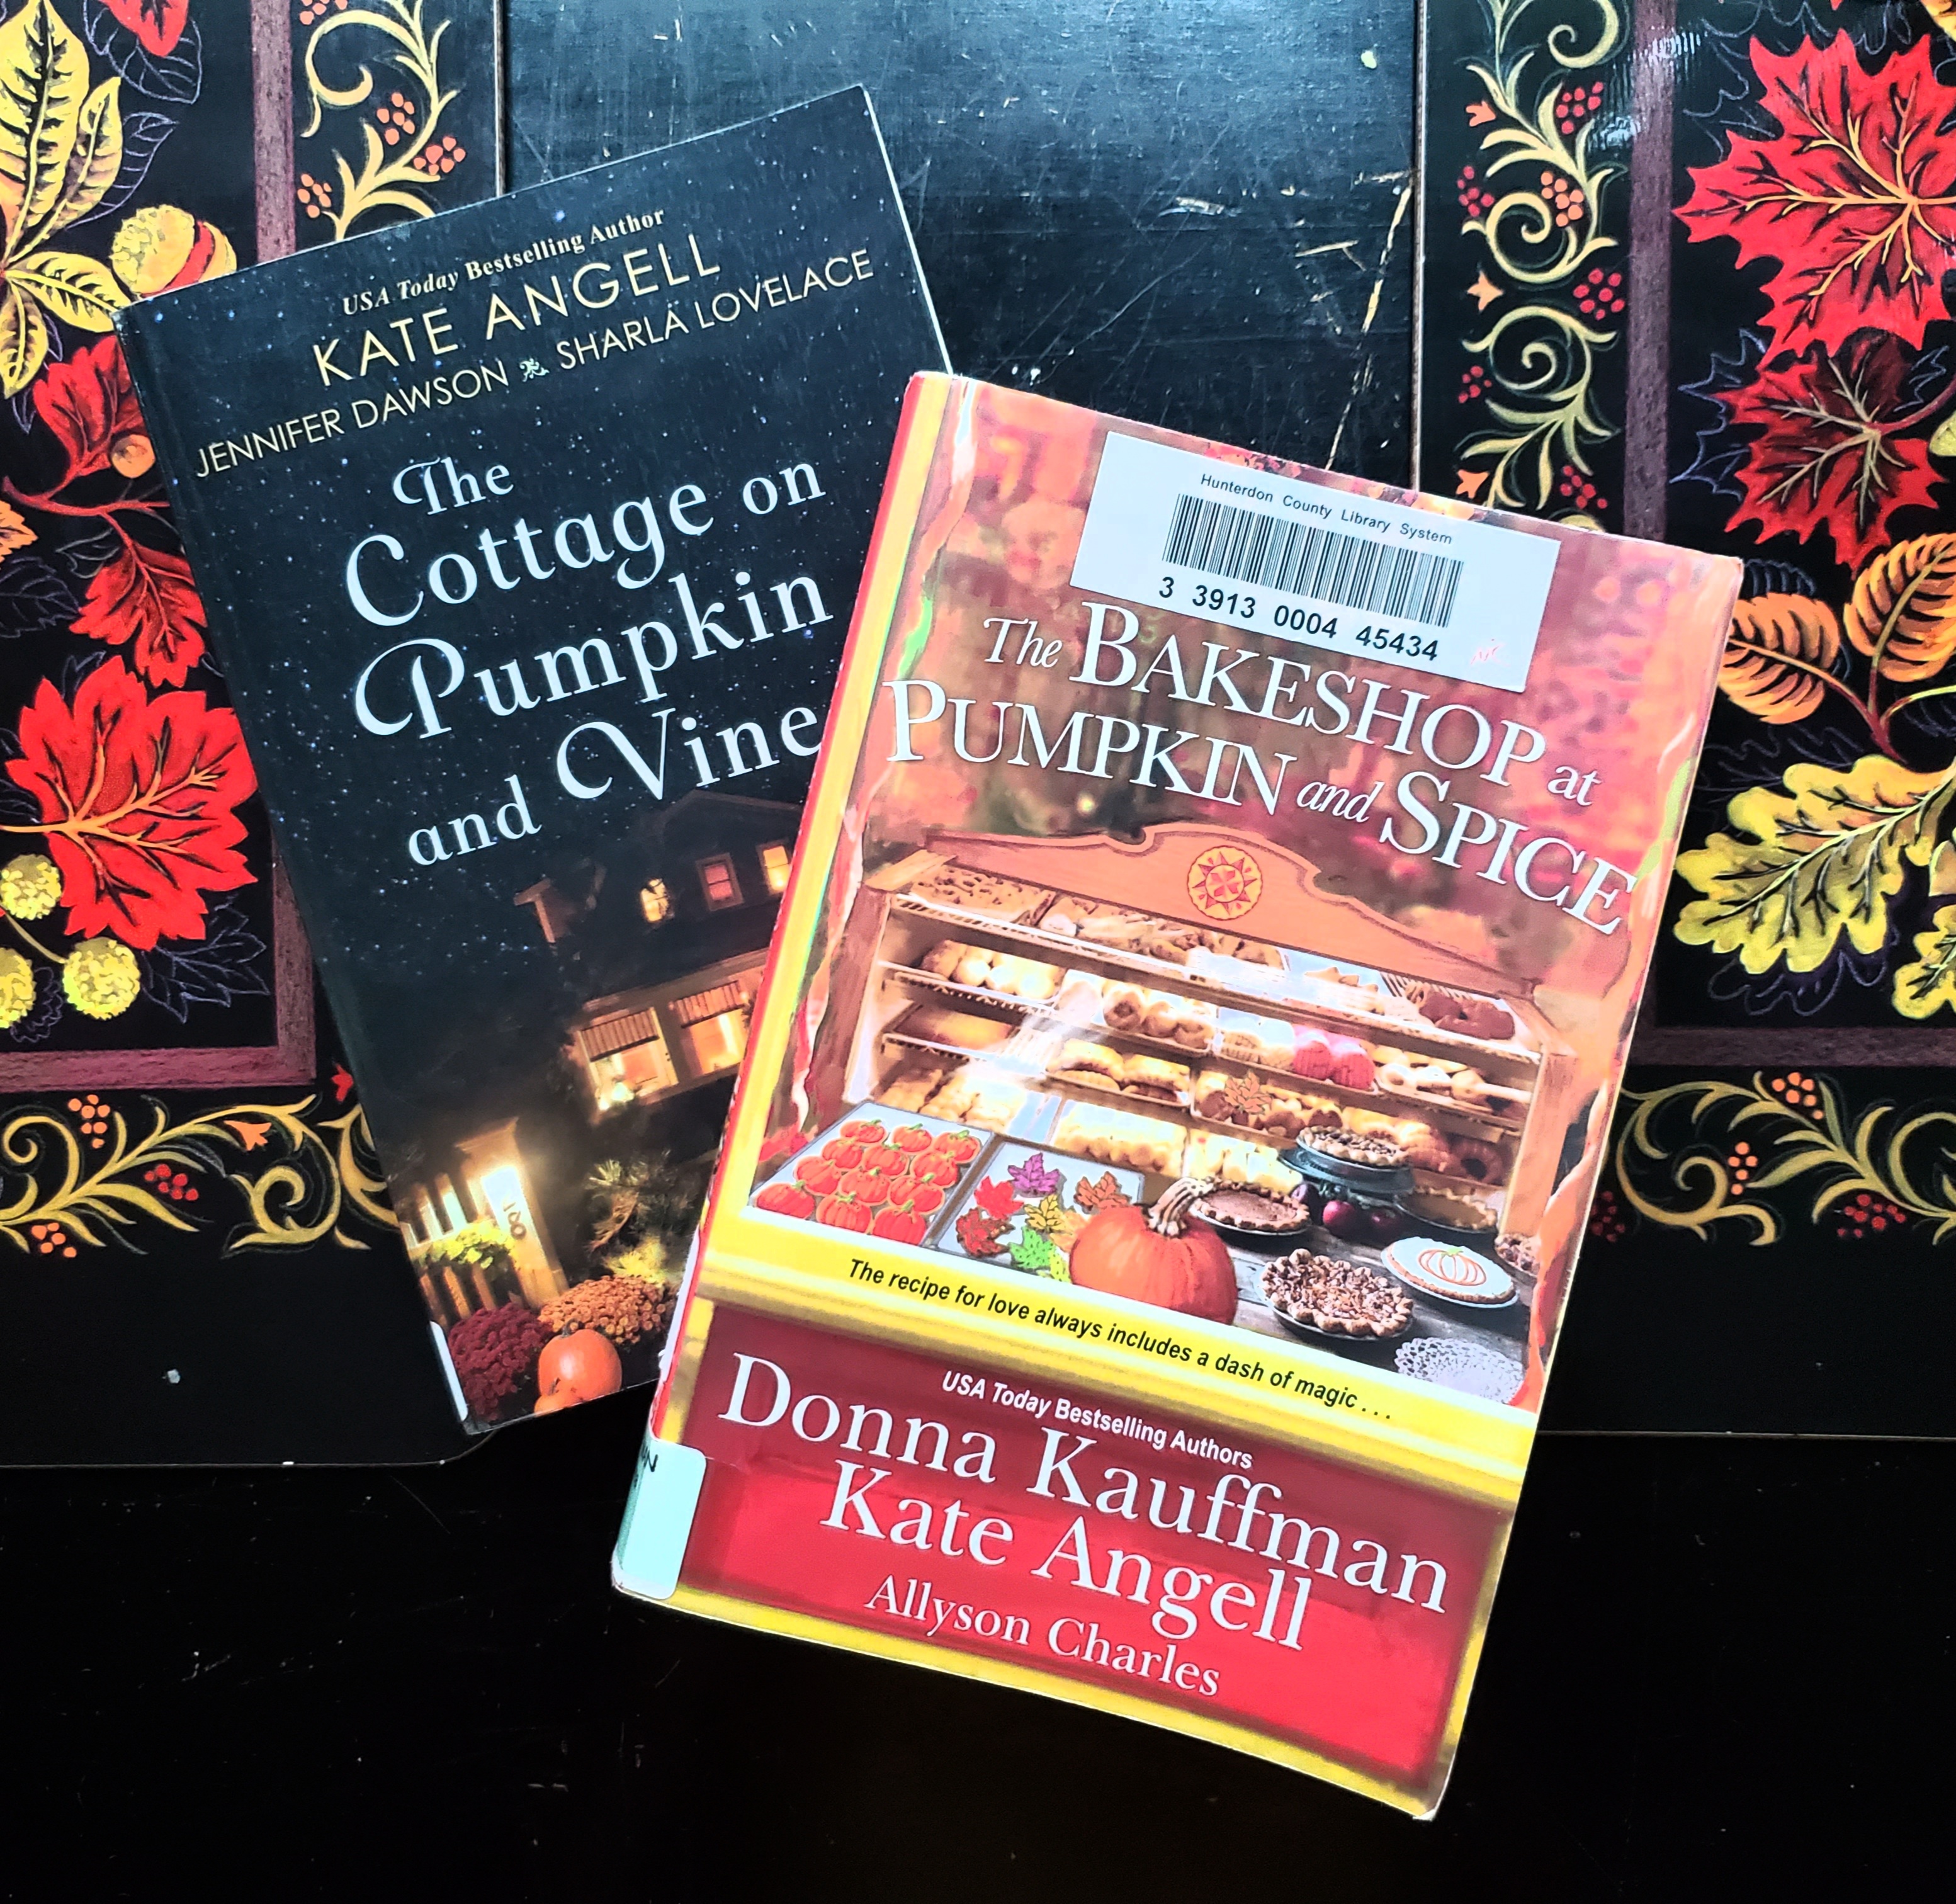 Book covers of The Cottage on Pumpkin and Vine and The Bakeshop on Pumpkin and Spice